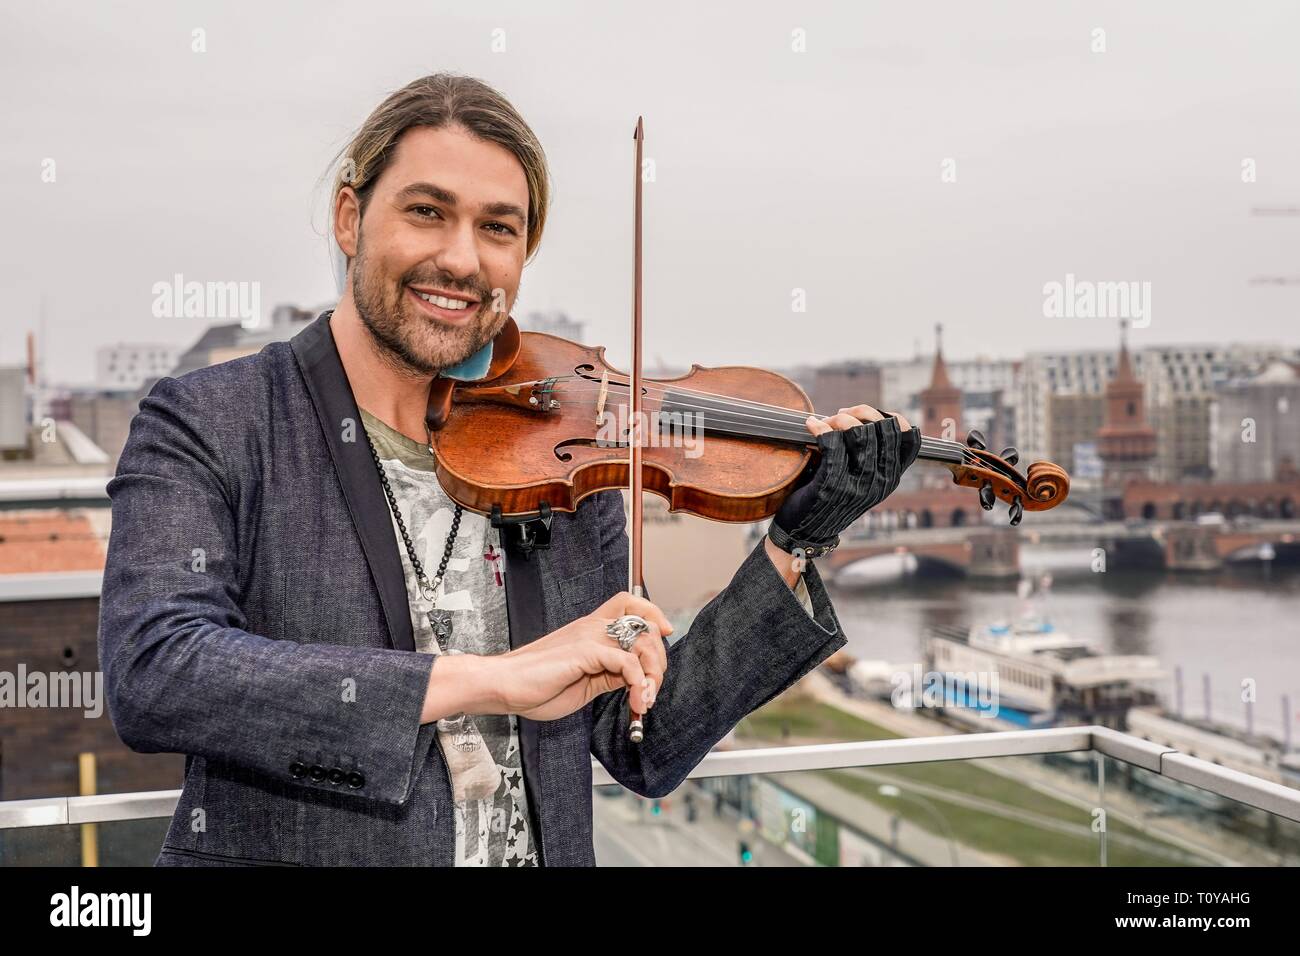 Berlin, Deutschland. 21st Mar, 2019. 21.03.2019, star violinist David Garrett presents his new crossover tour UNLIMITED - GREATEST HITS at the 260-degree bar in Berlin, with which he will perform in the capital. Portrait of the musician with violin on the terrace of the 206 degree bar. Credit: dpa/Alamy Live News Stock Photo